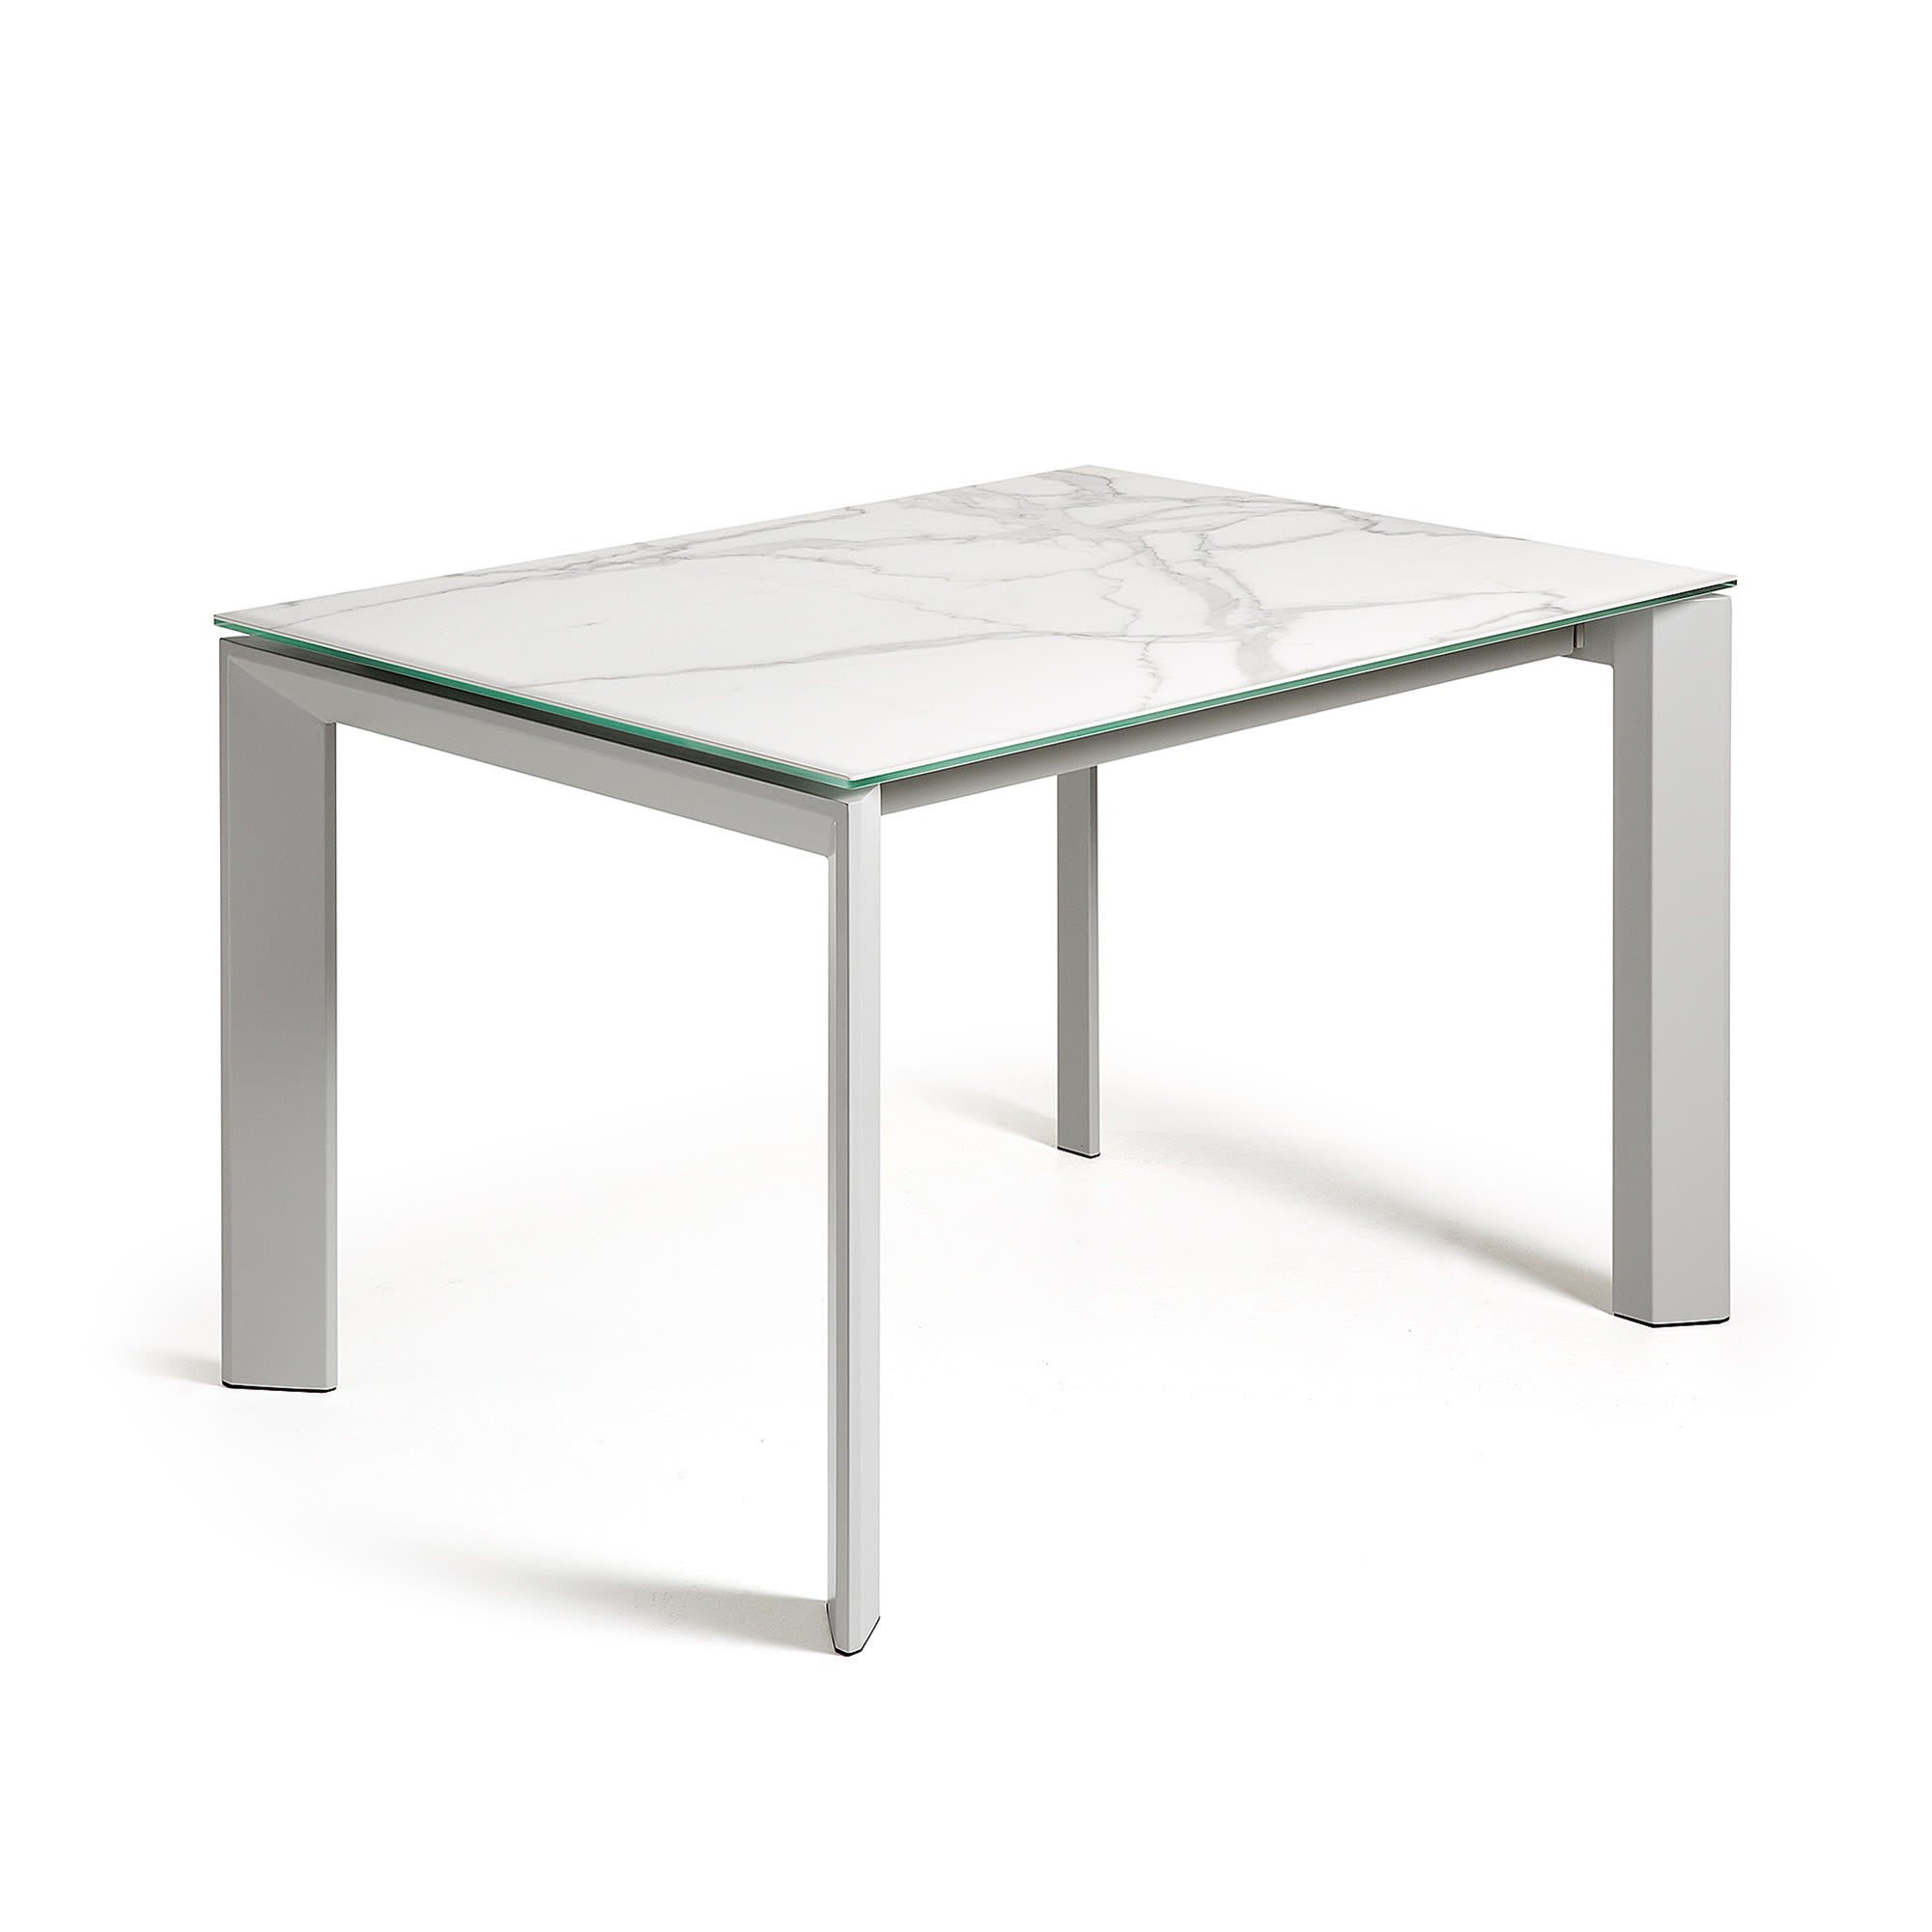 Axis porcelain extendable table with White Kalos finish and gray legs 120 (180) cm